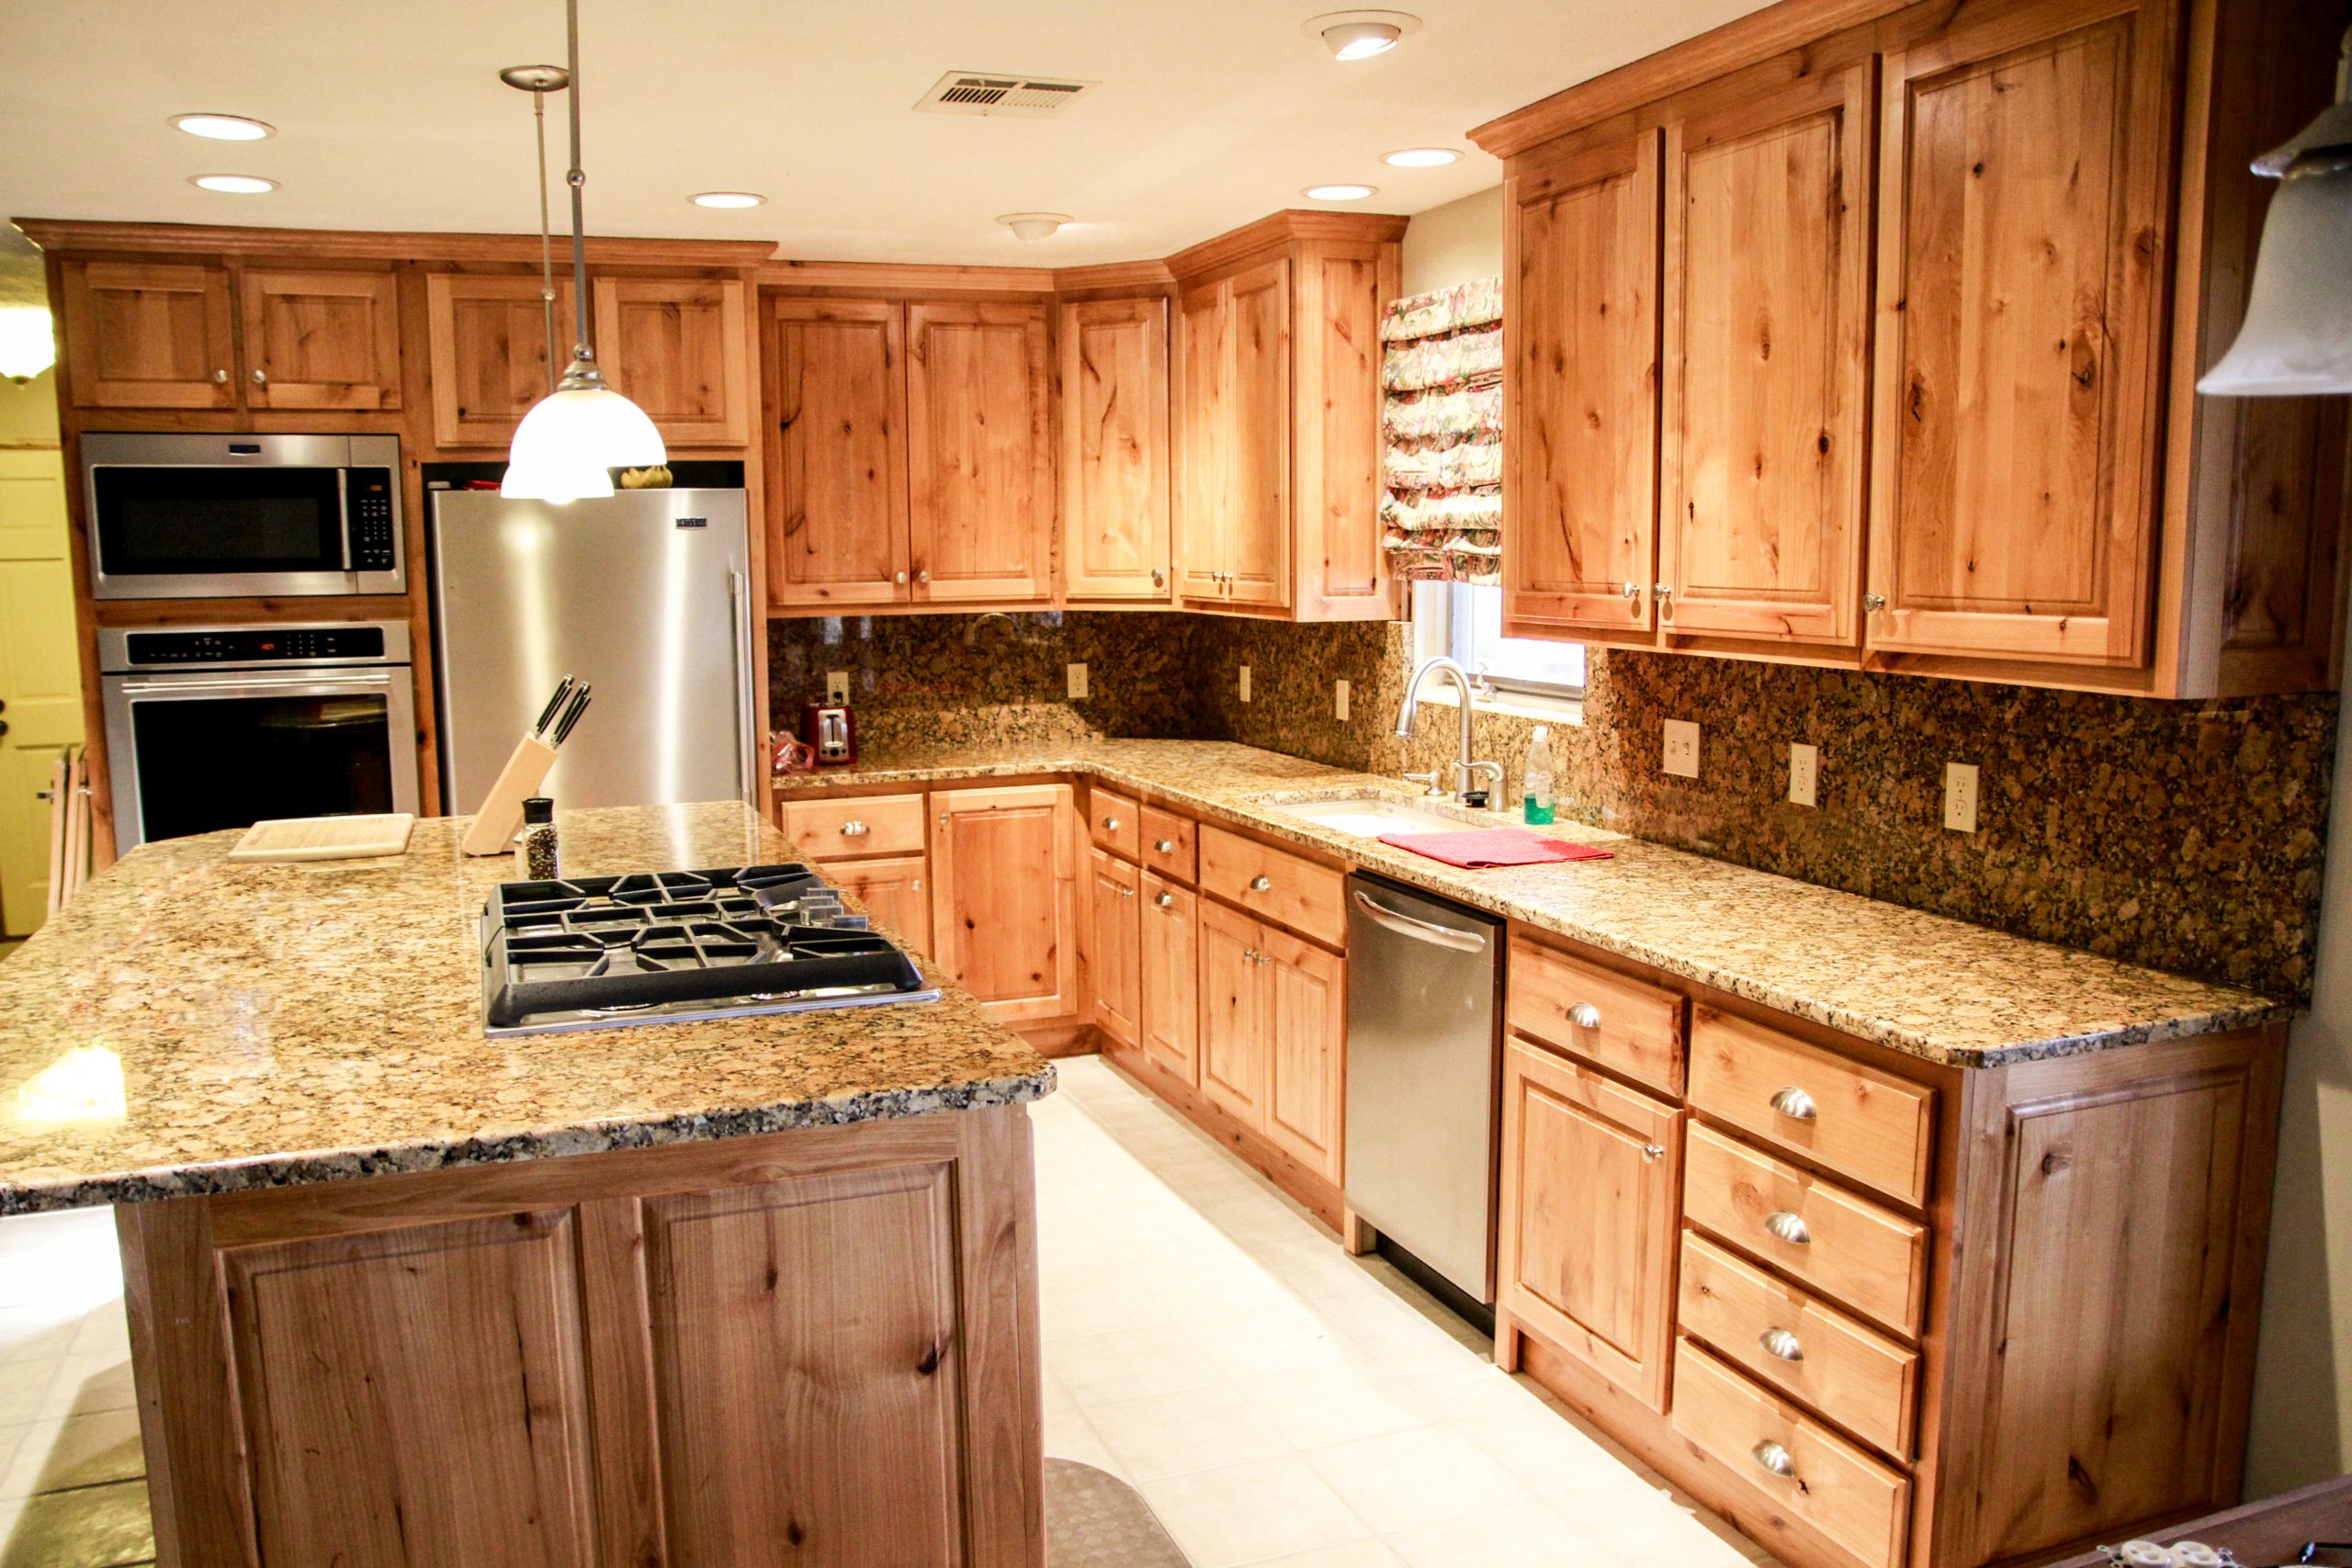 Farmhouse Kitchen Cabinets in Beach Haven NJ, Buy custom kitchen cabinets factory direct in Beach Haven NJ, Buy custom shaker cabinets factory direct in Beach Haven NJ